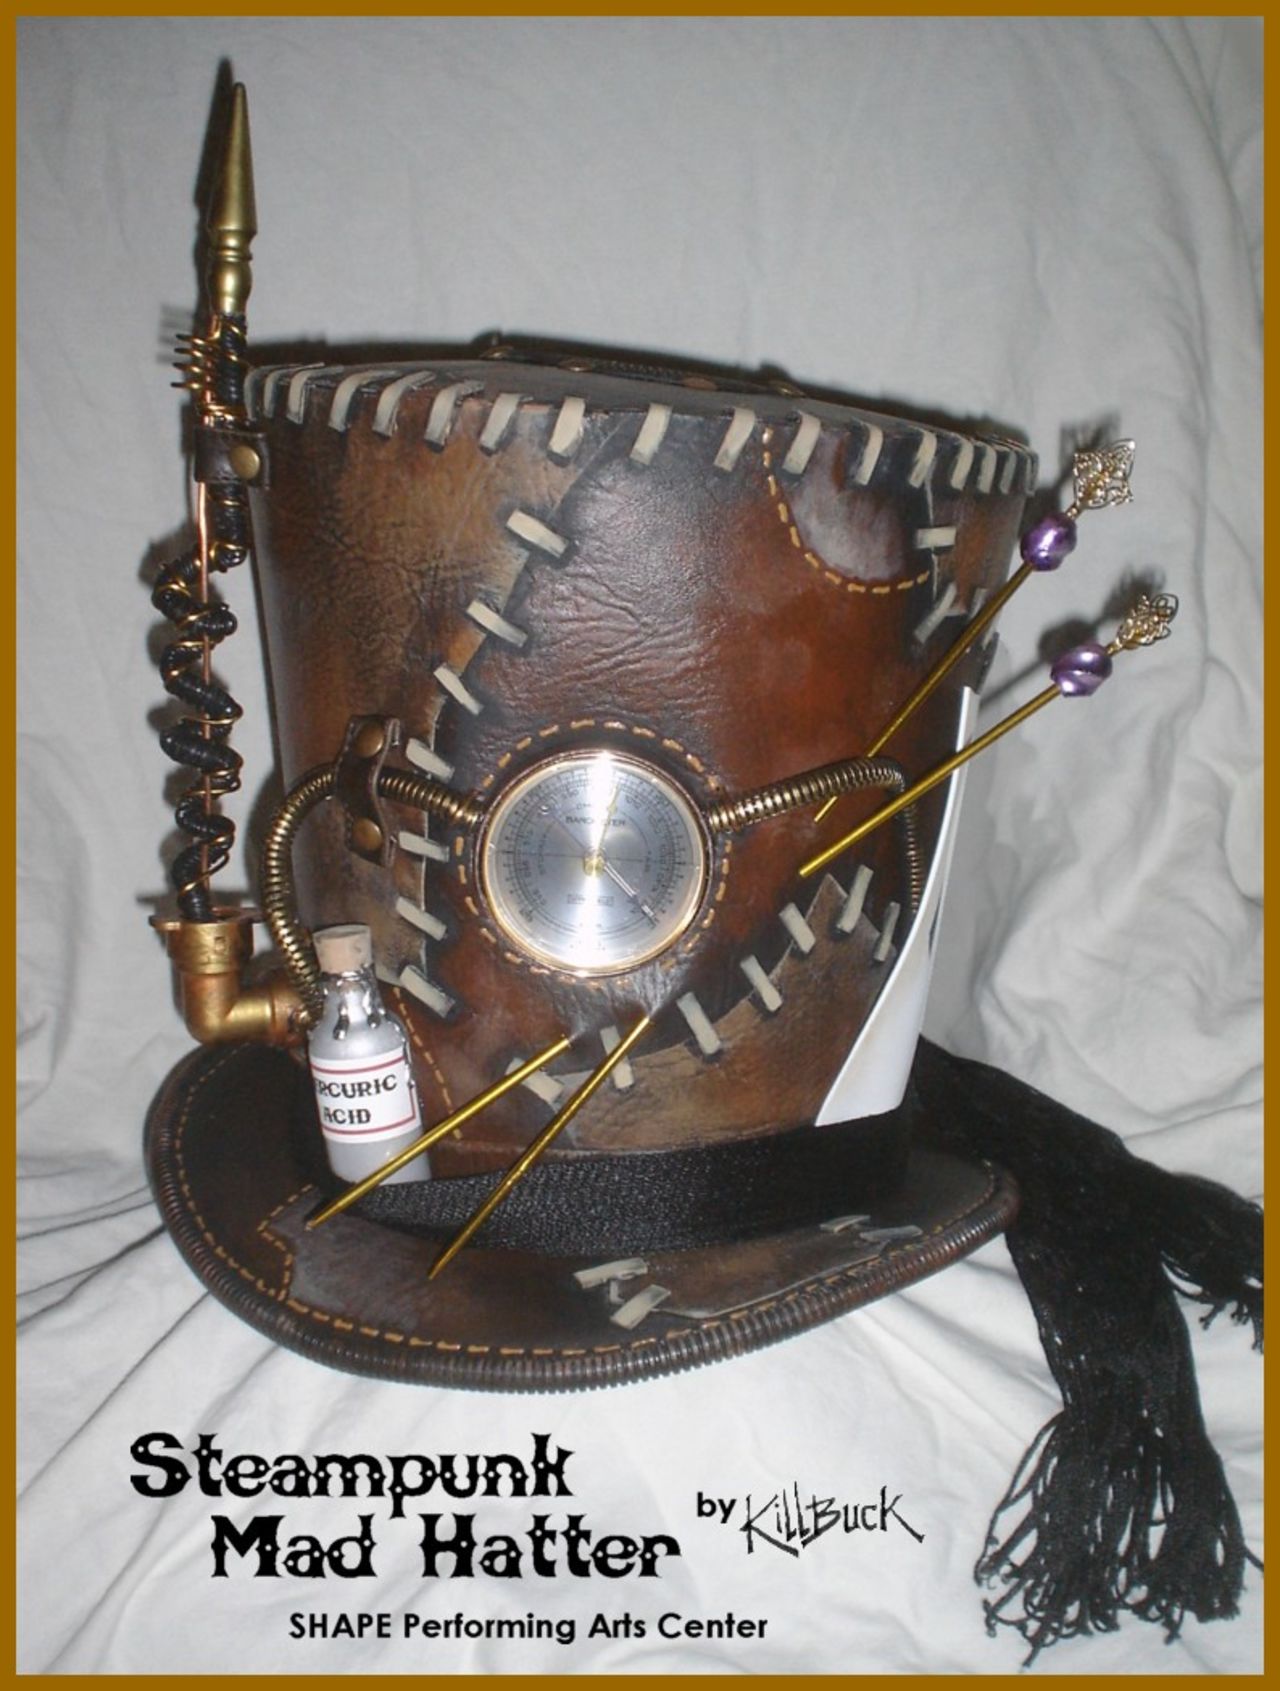 One of Rex Norman's steampunk top hat designs.